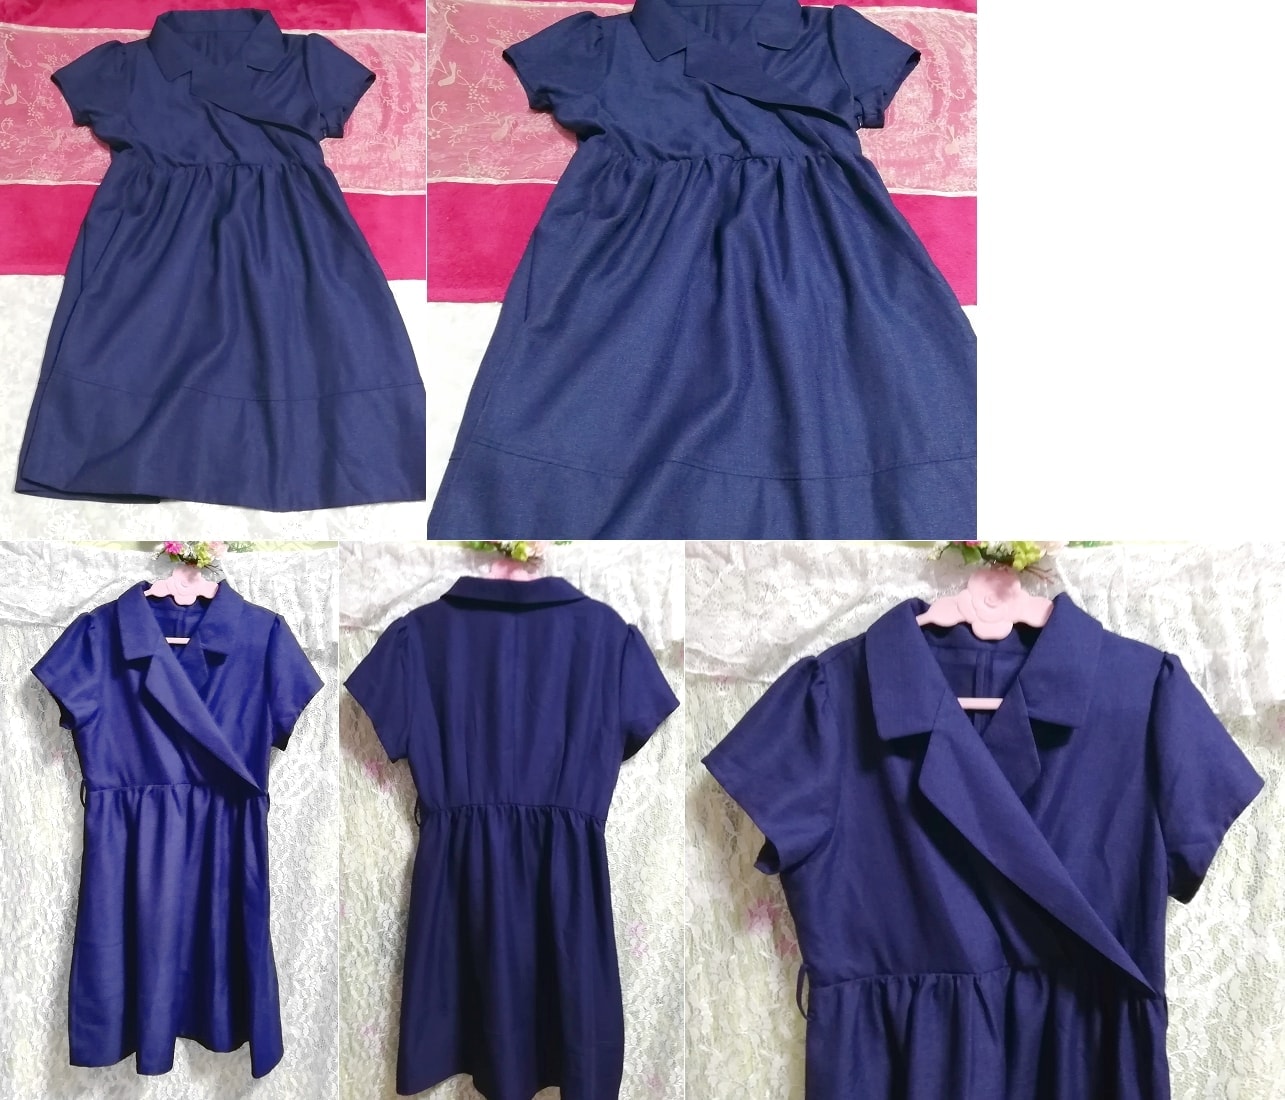 Navy navy suit style short sleeve negligee nightgown tunic dress, mini skirt, xl size and above